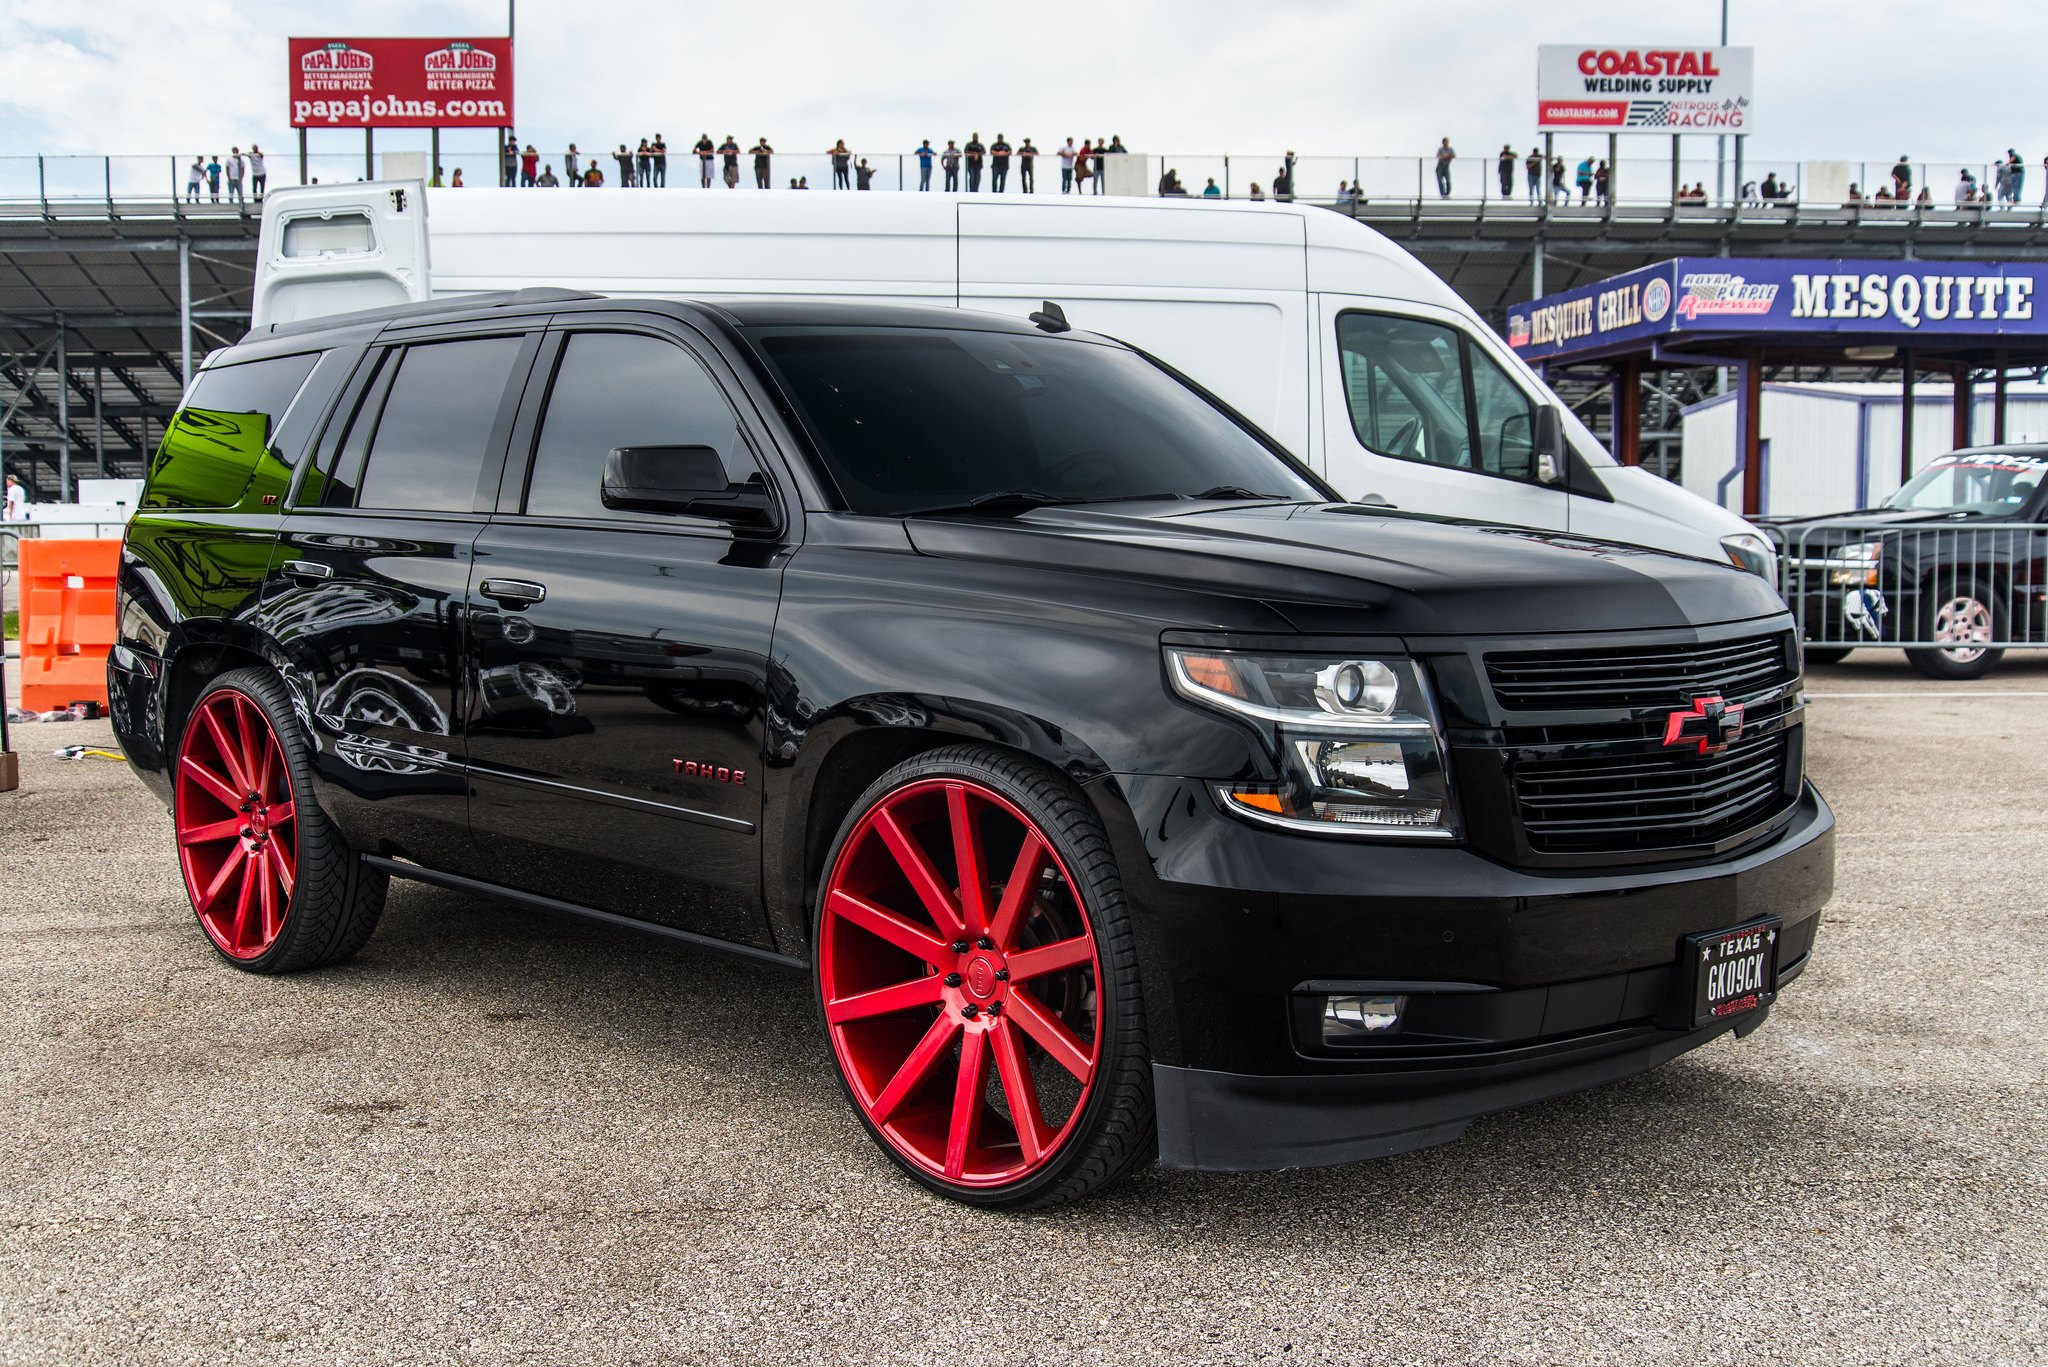 Red Color Matched DUB Wheels on Black Chevy Tahoe - Photo by DUB